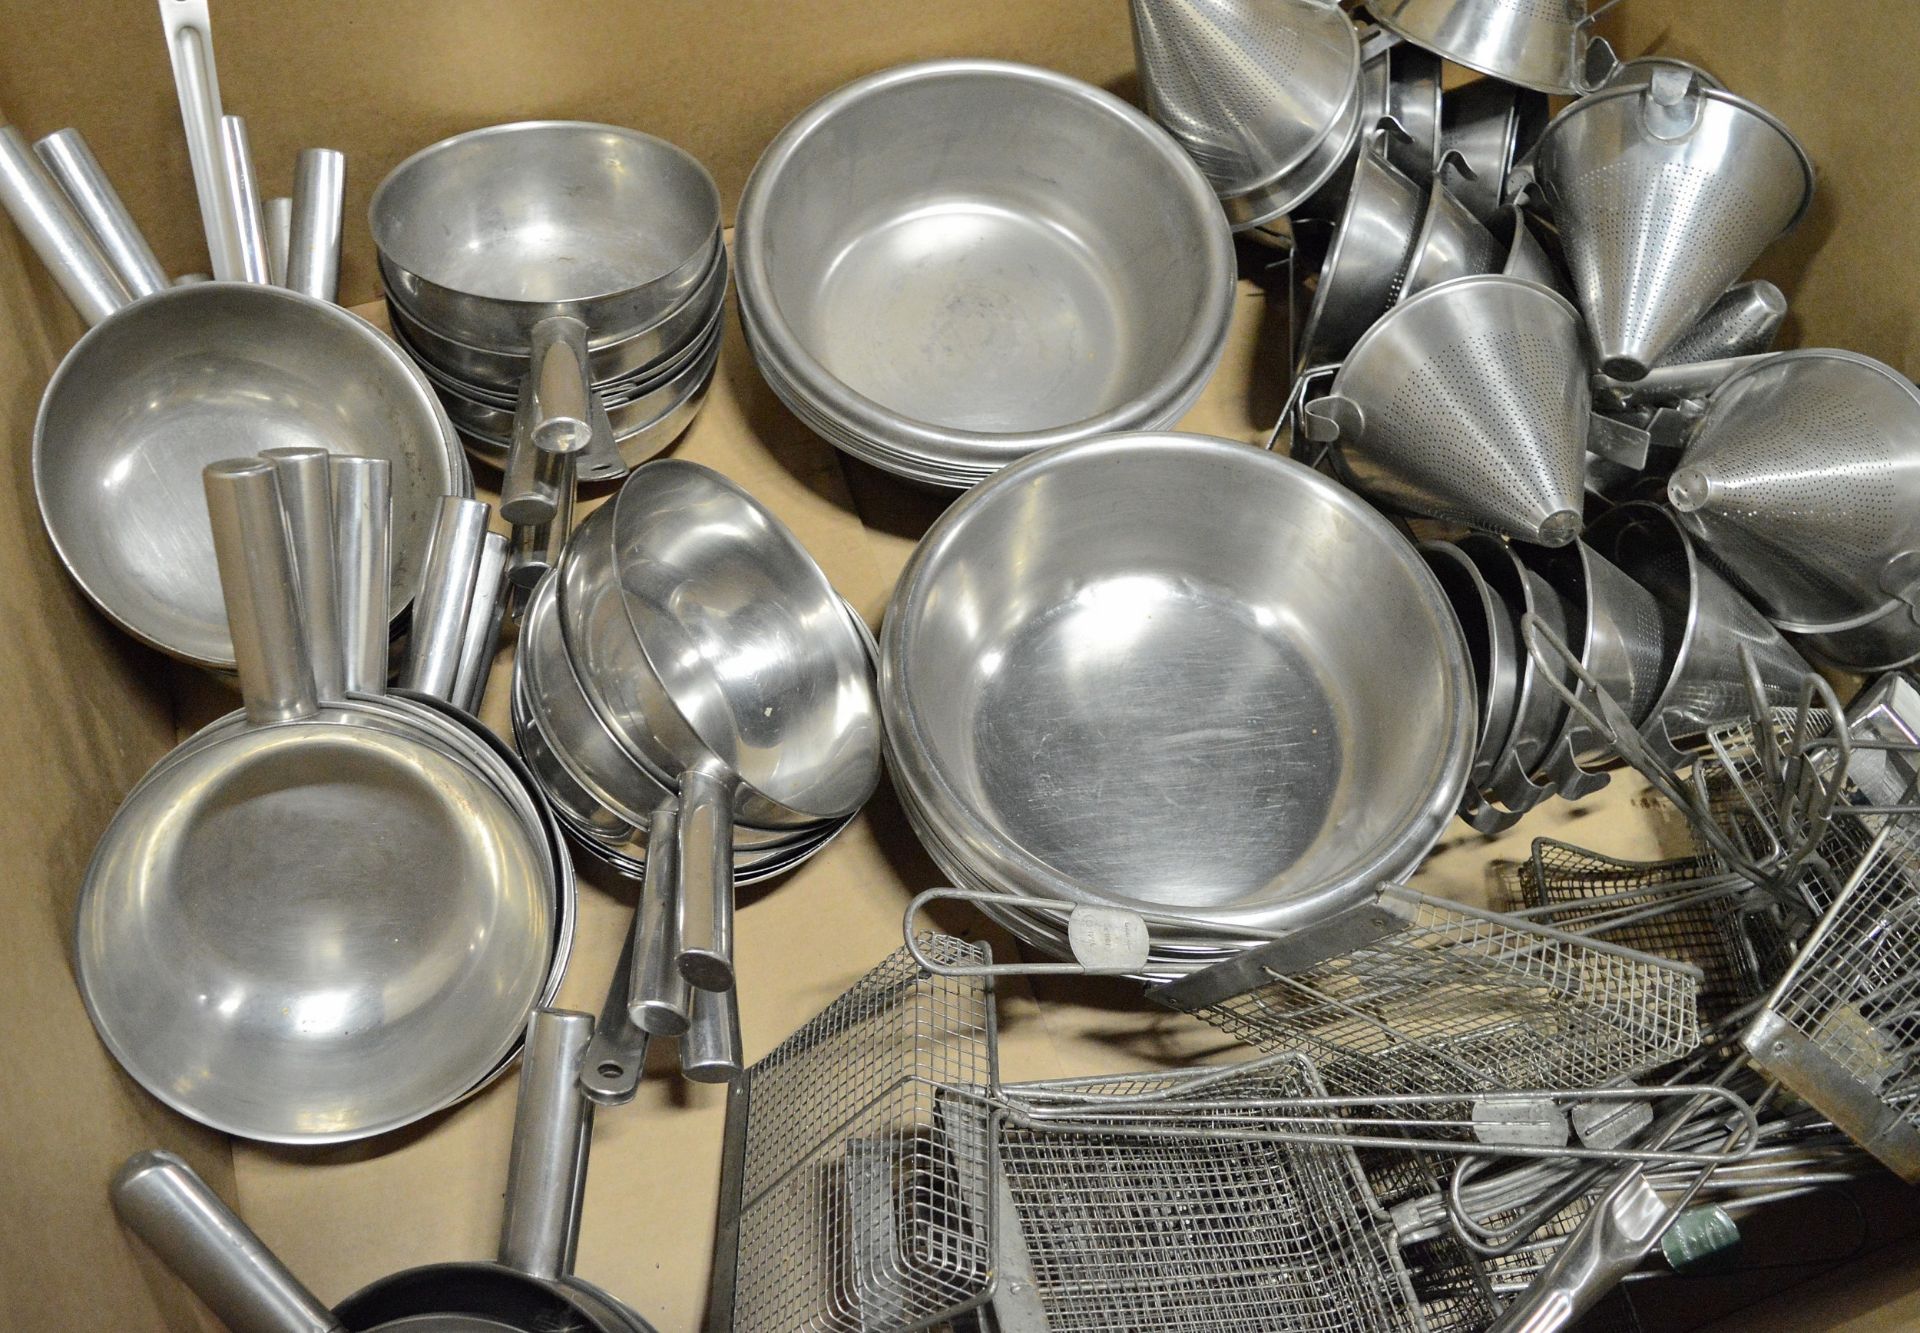 Various Catering - Stainless Basin, Mixing Bowl, Stainless Sieves, chip scoops - Image 3 of 3